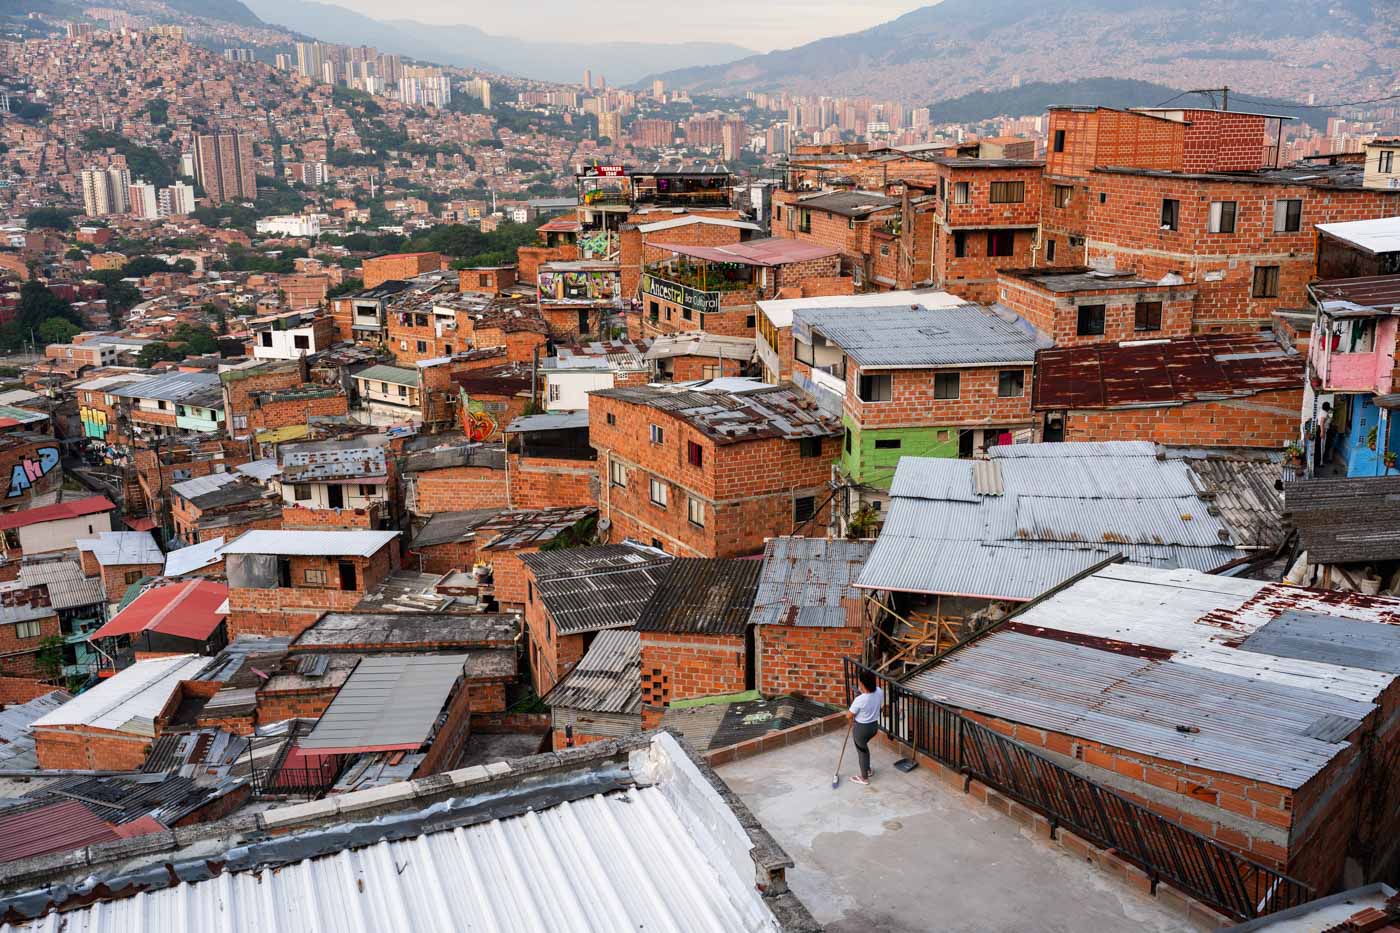 A Comuna 13 resident standing on the roof of her house looking over all the favelas across Comuna 13.